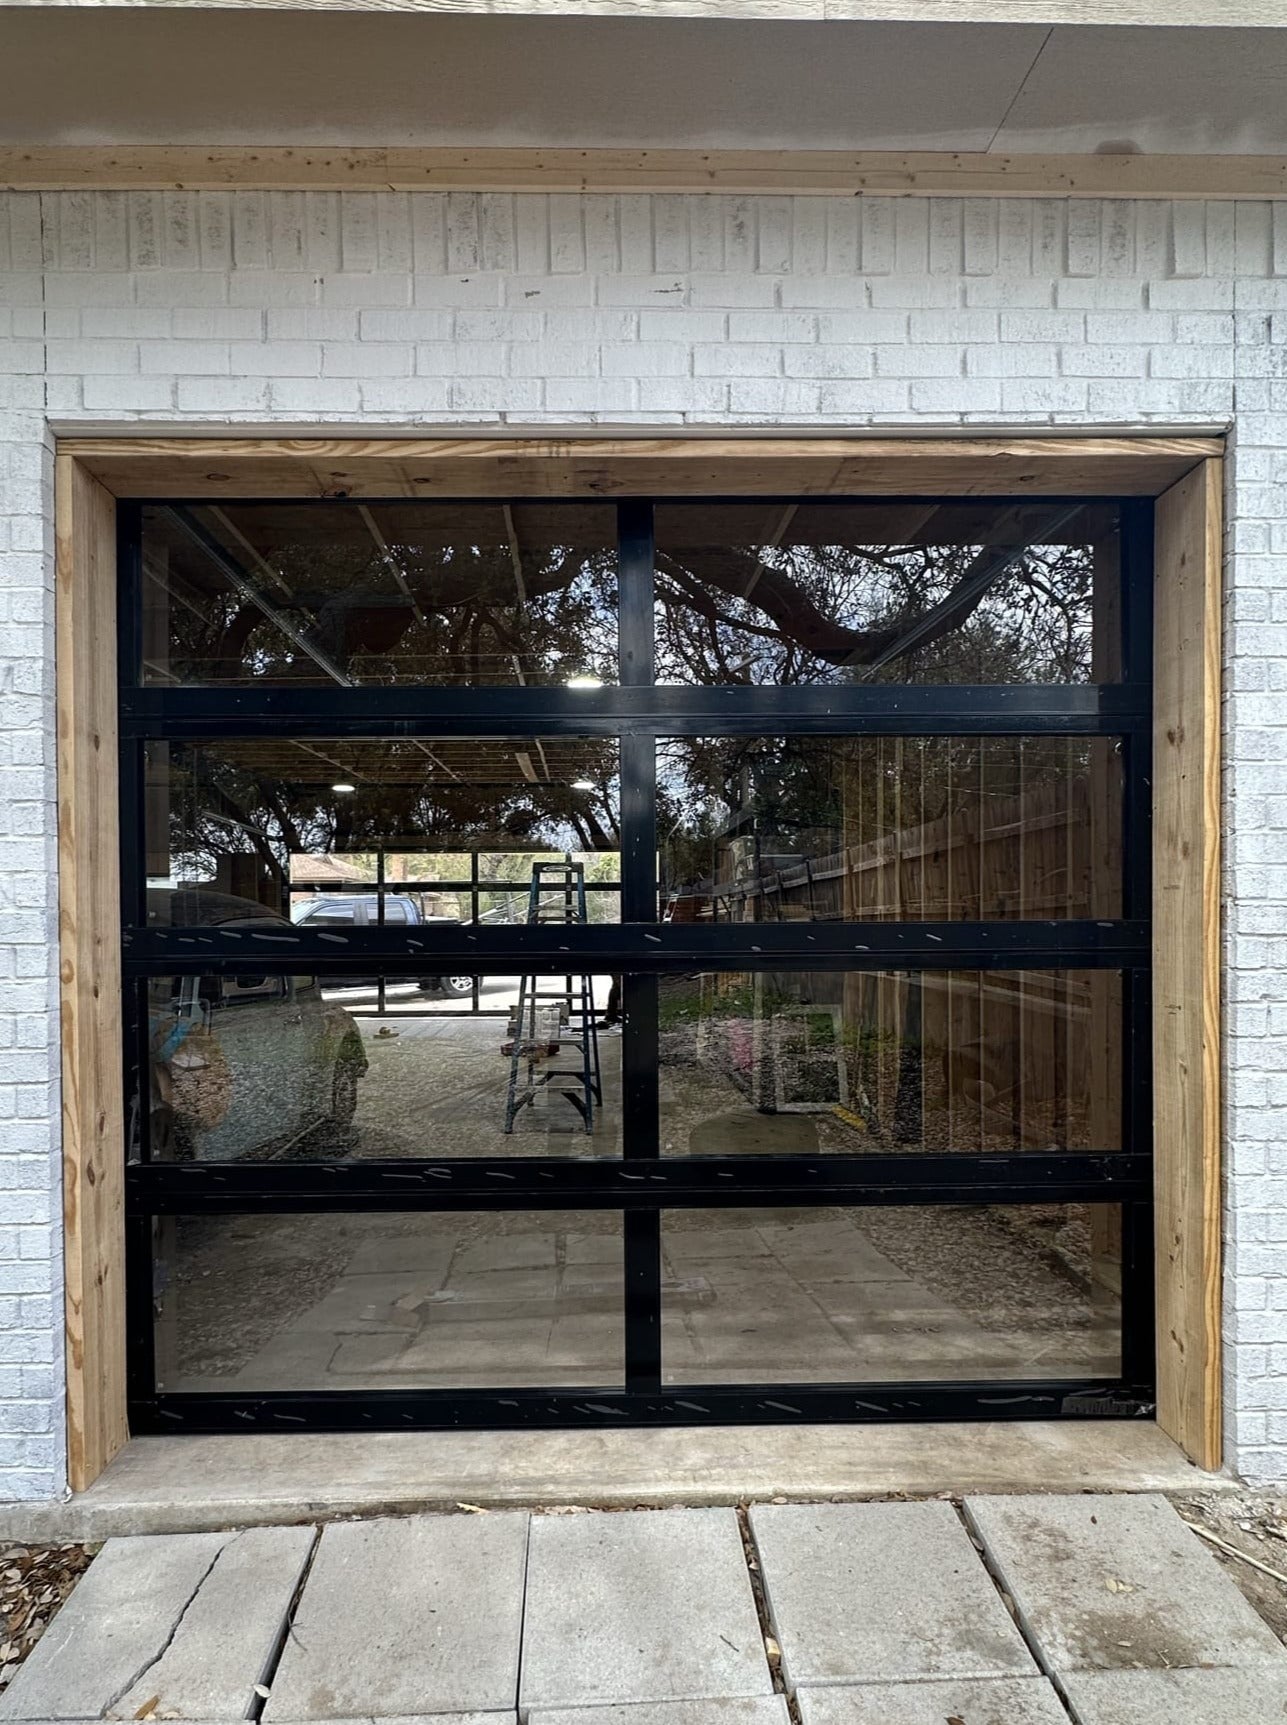 8 FT Wide By 10 FT Tall Full View Garage Door Matt Black Finish With Clear Glass